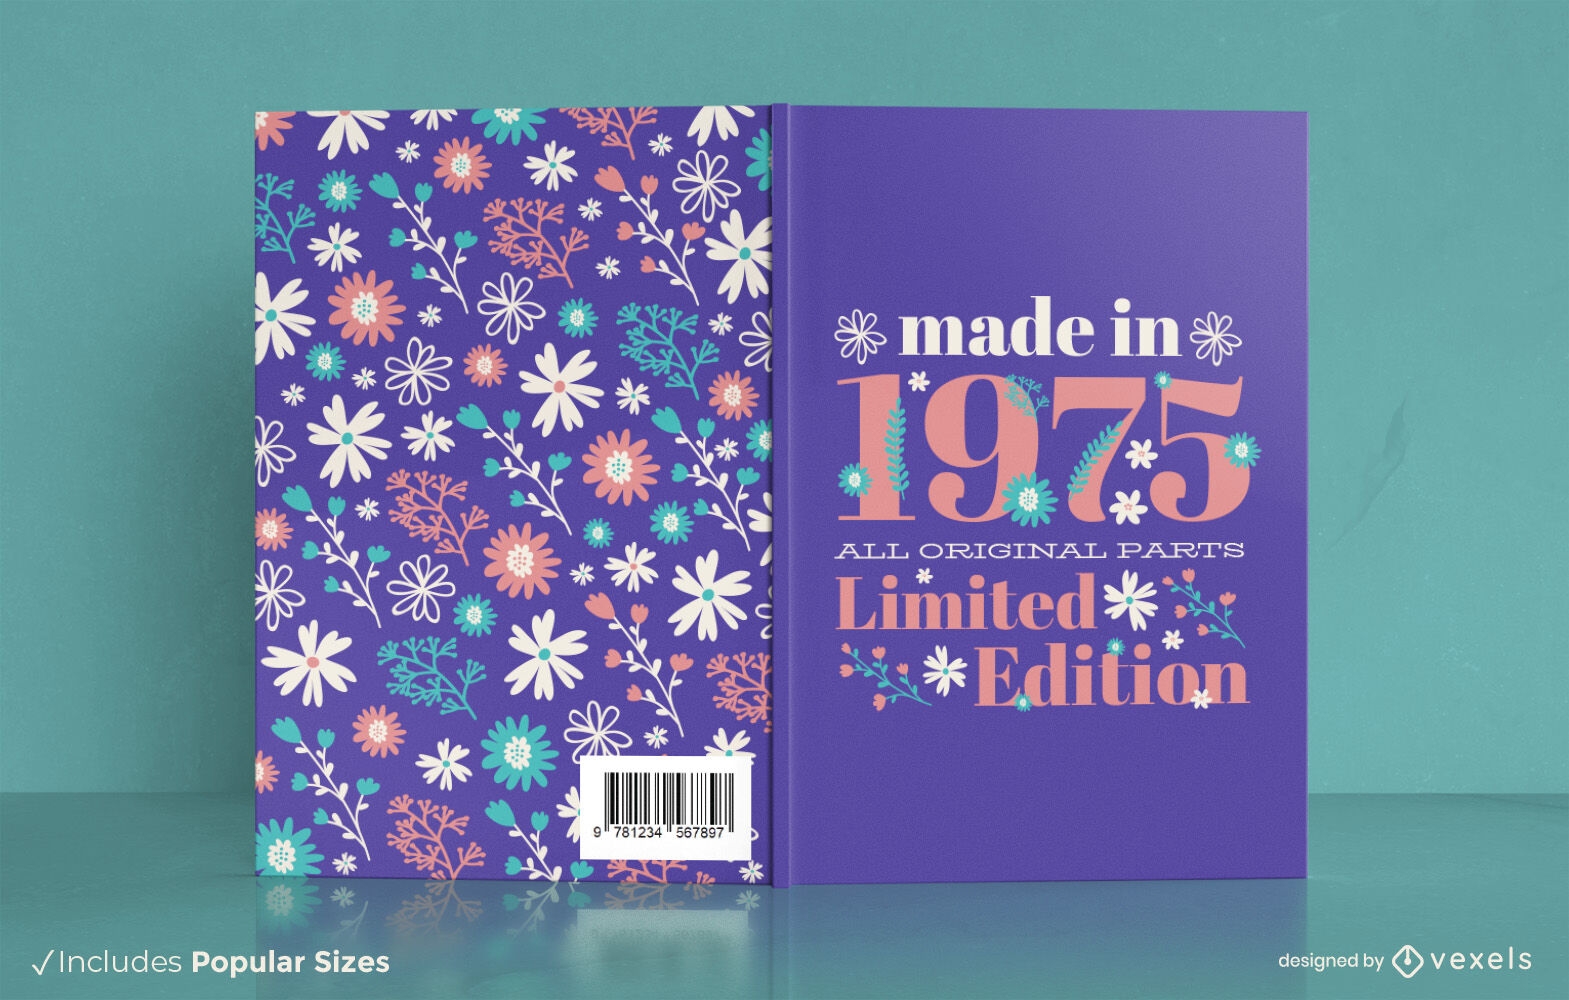 Made in 1975 floral book cover design